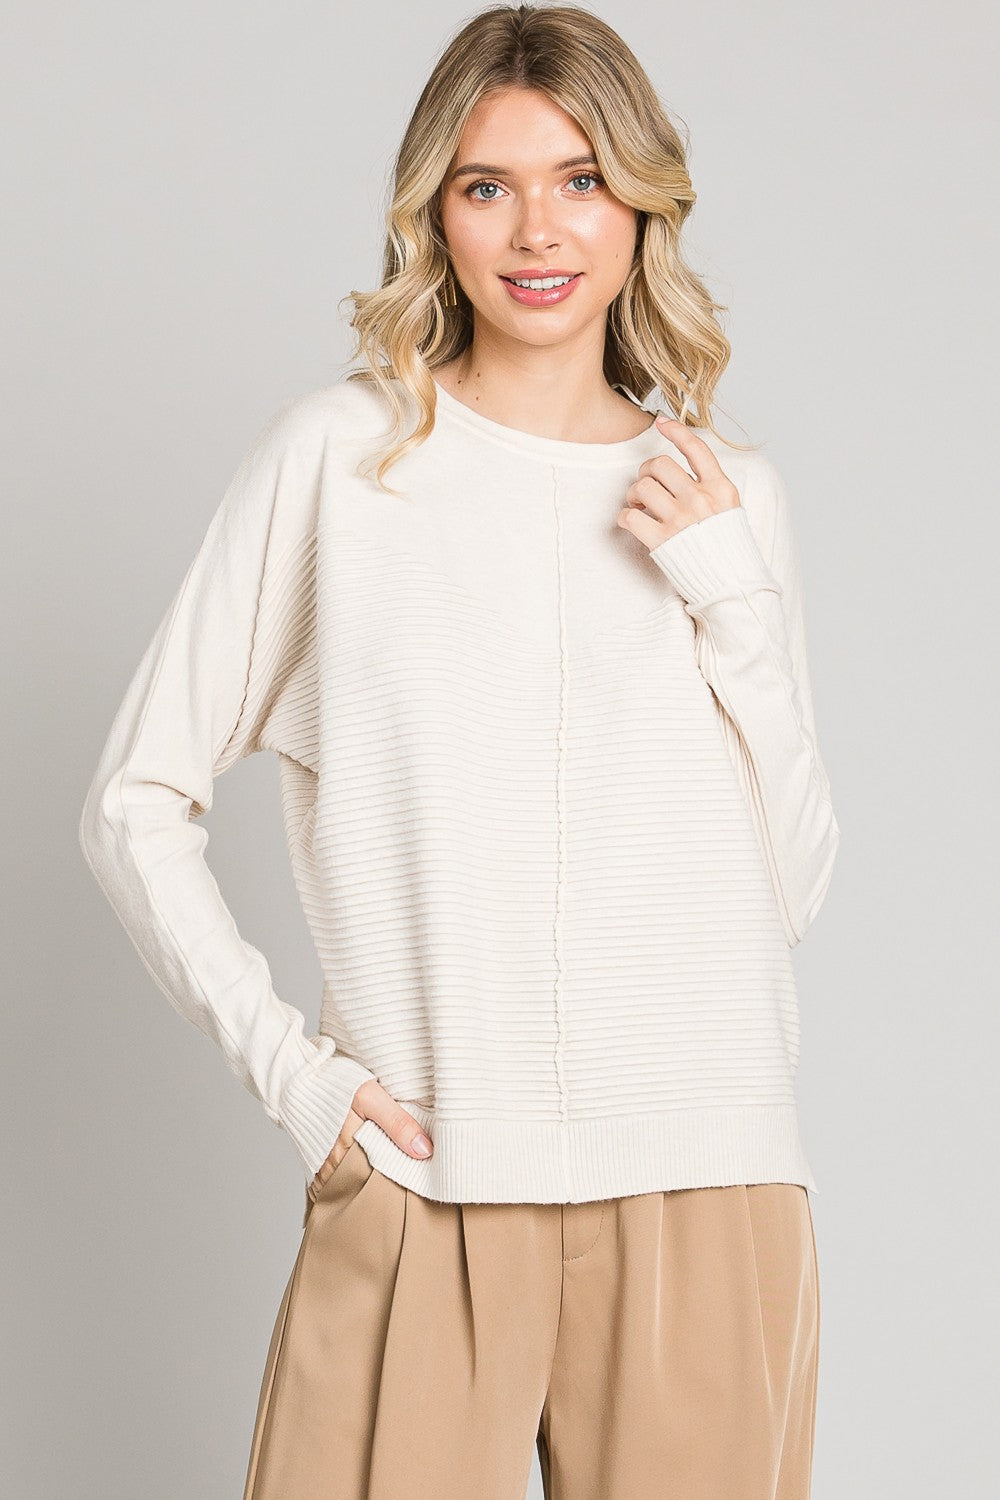 Sweetheart Textured Top | 4 Colors - All Sales Final